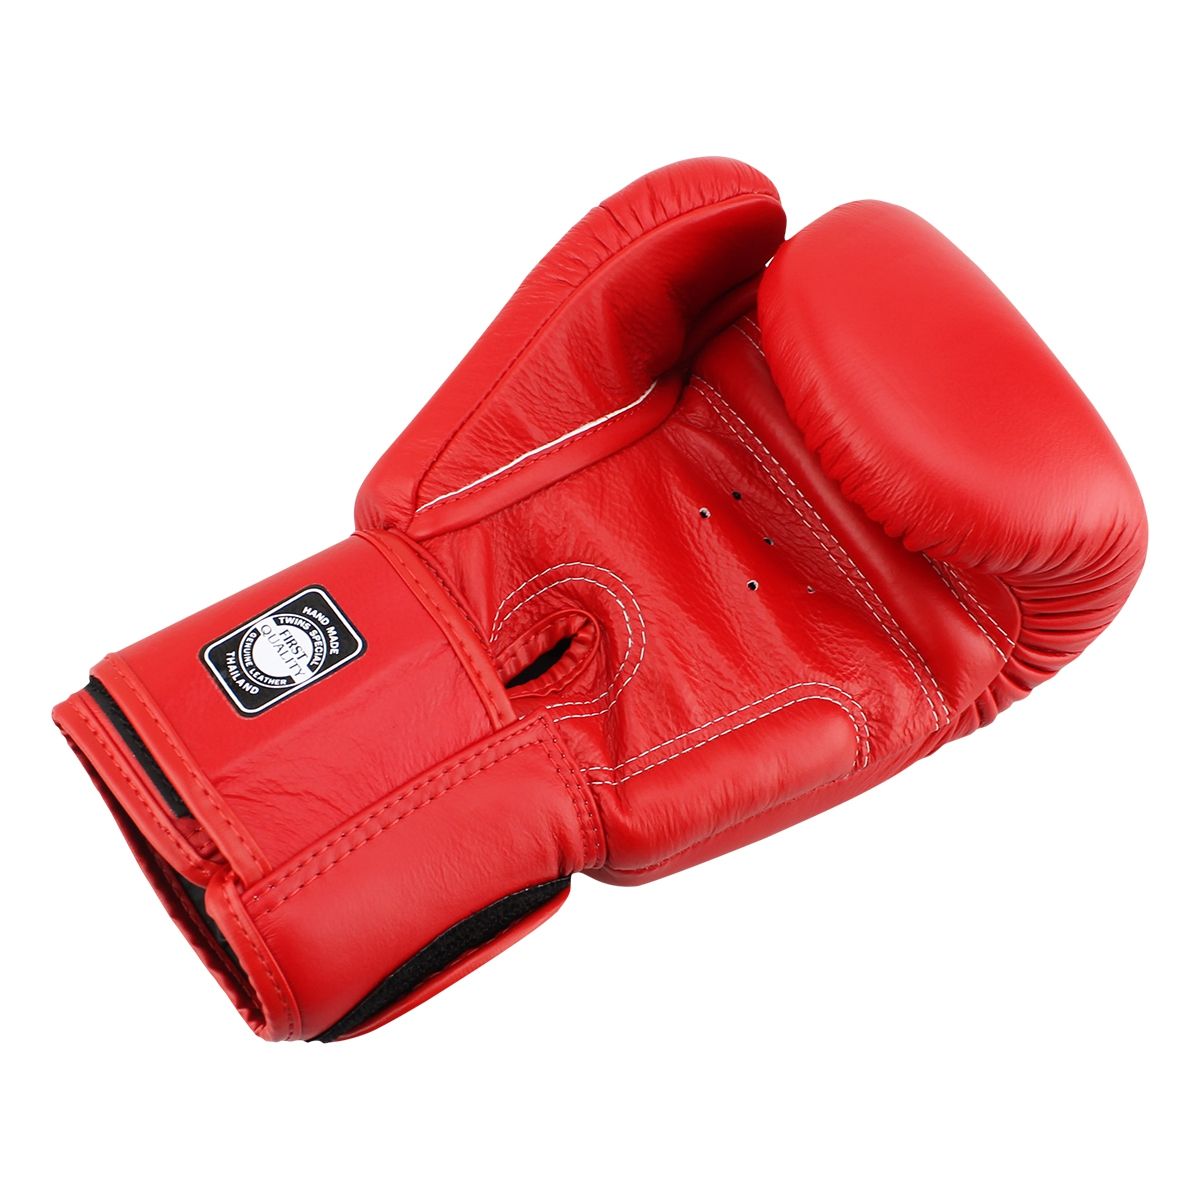 Twins Special BGVL3 Red Boxing Gloves